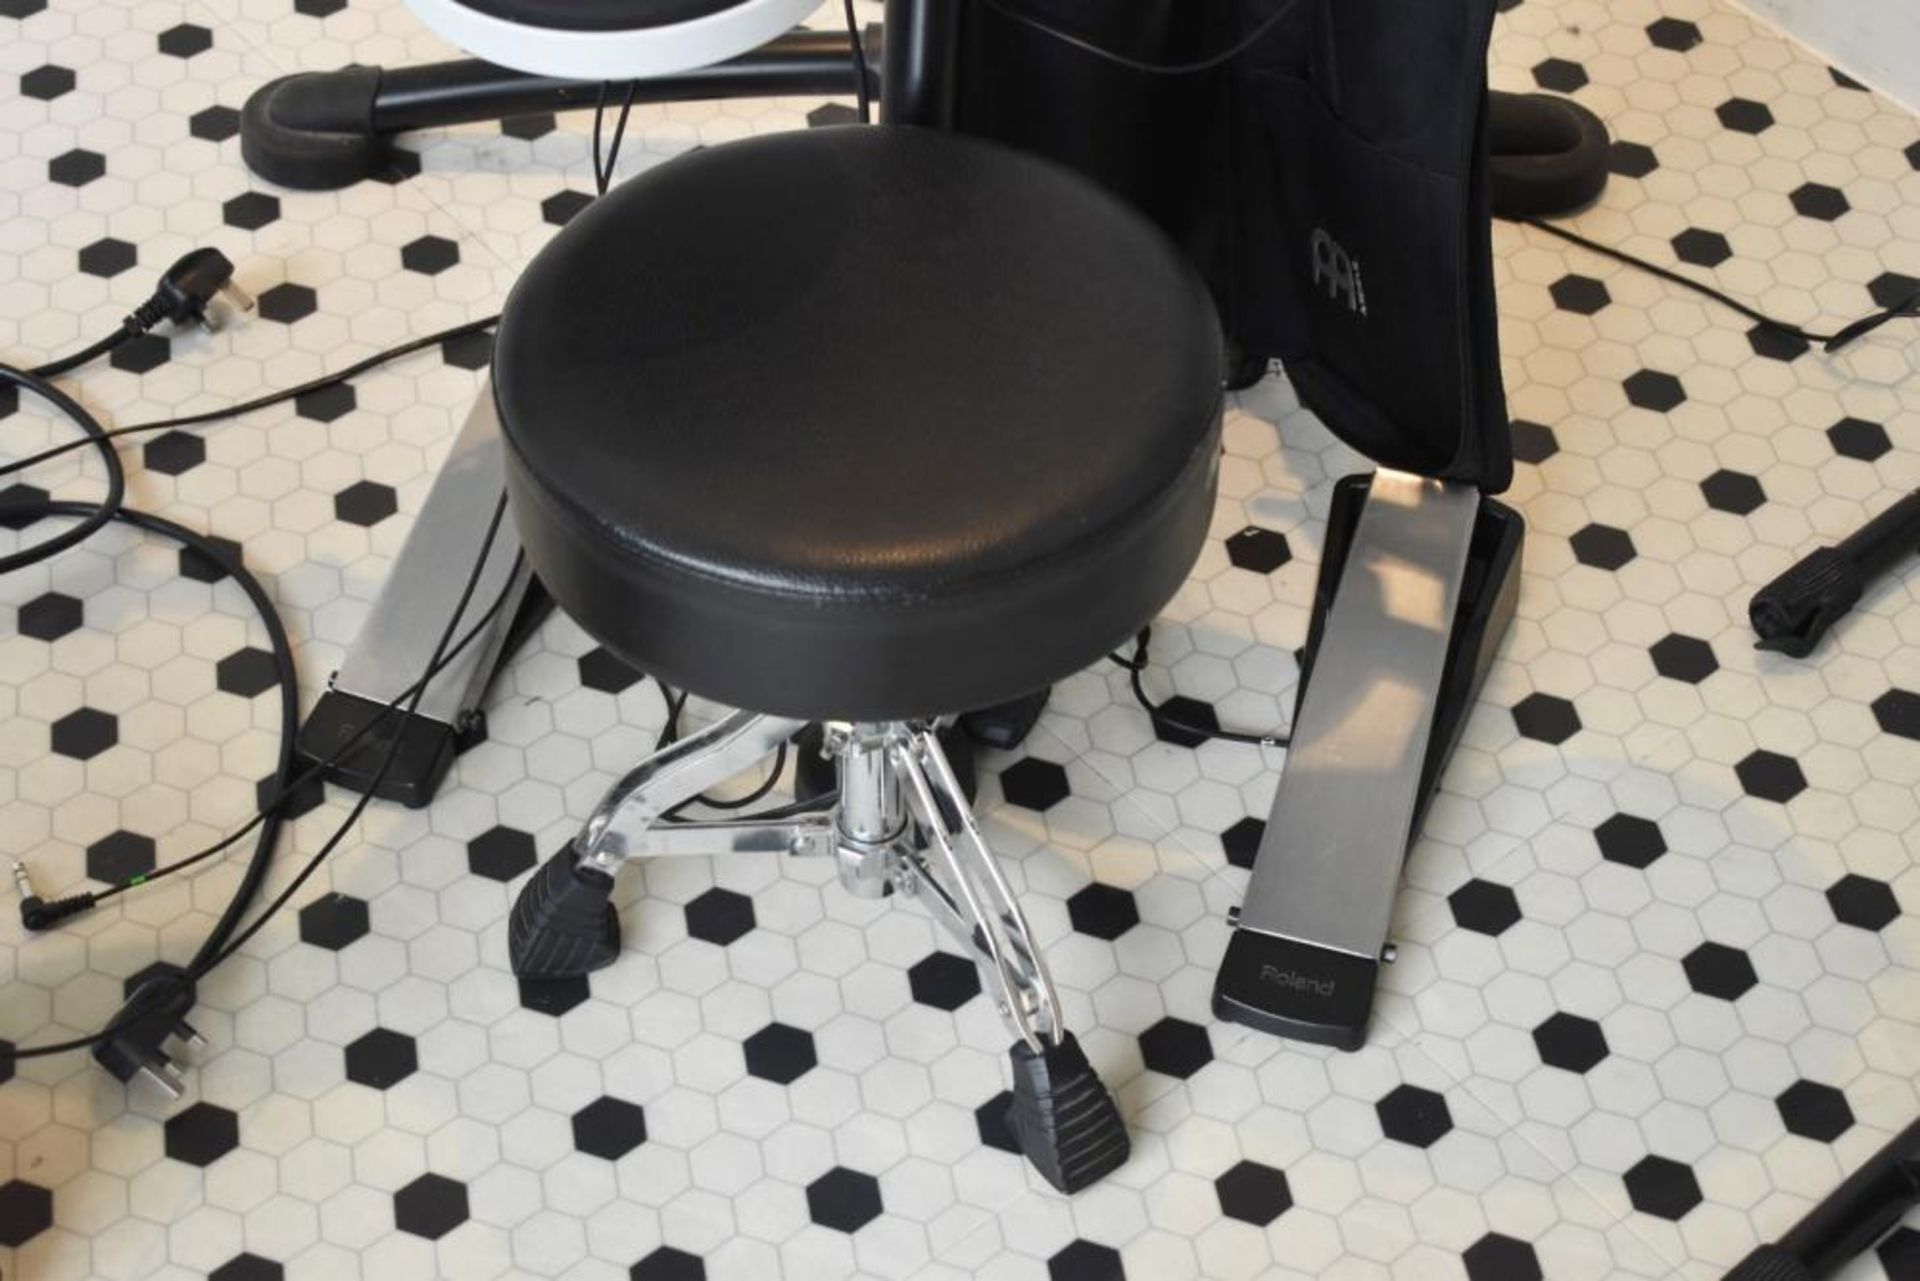 1 x Roland V-Drums Electronic Drum Kit With Stool and Stick Bag - Ref KP103 - CL489 - Location: Putn - Image 3 of 5